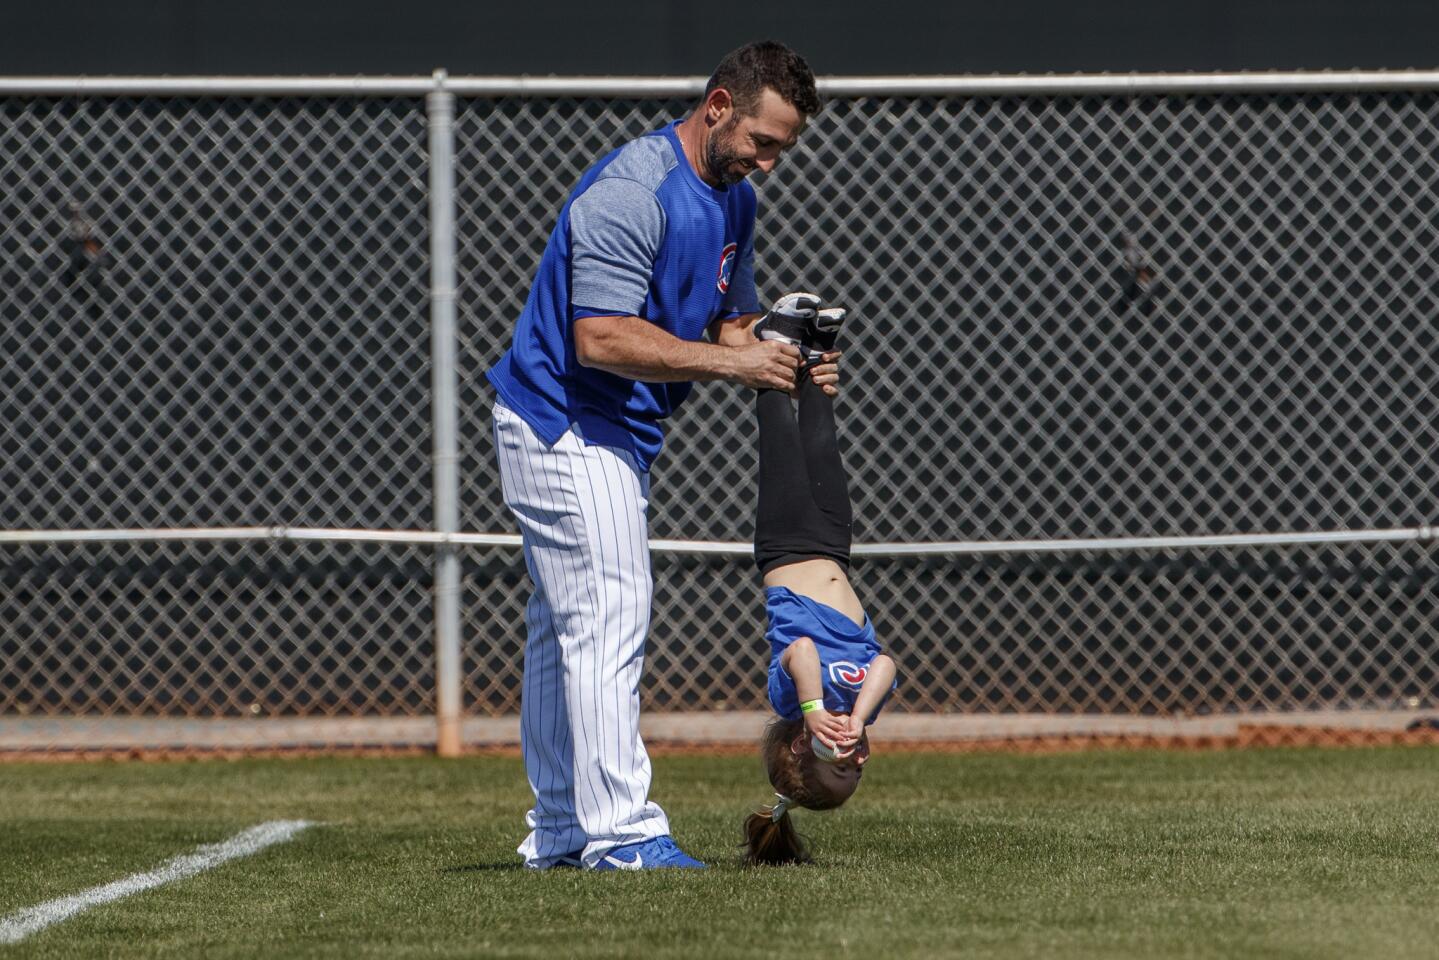 Daniel Descalso plays with his 2-year-old daughter Emilia before a Cactus League game against the Athletics at Sloan Park in Mesa, Ariz., on Thursday, Feb. 28, 2019.